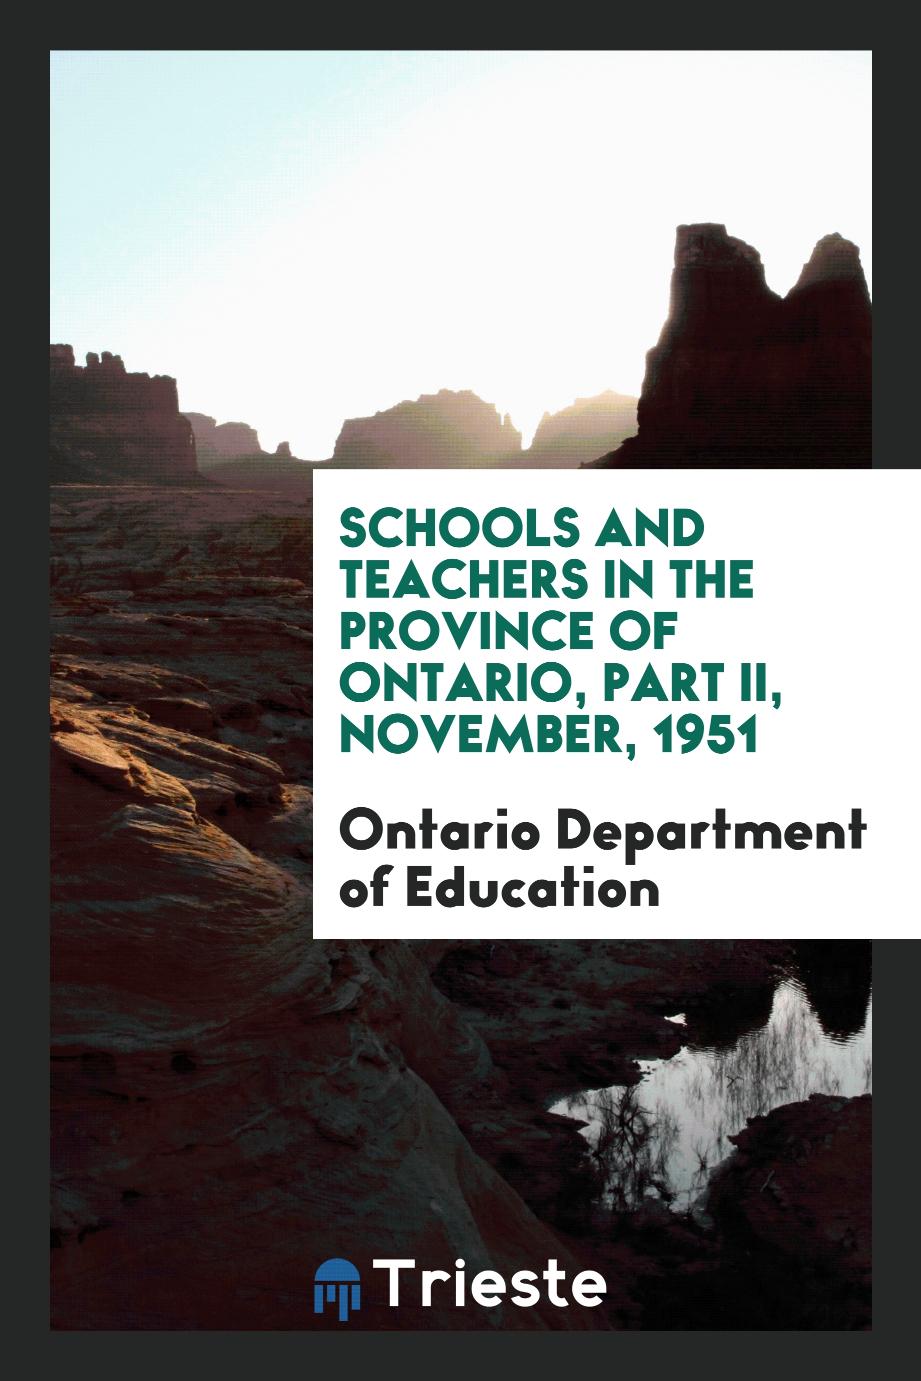 Schools and teachers in the Province of Ontario, Part II, November, 1951